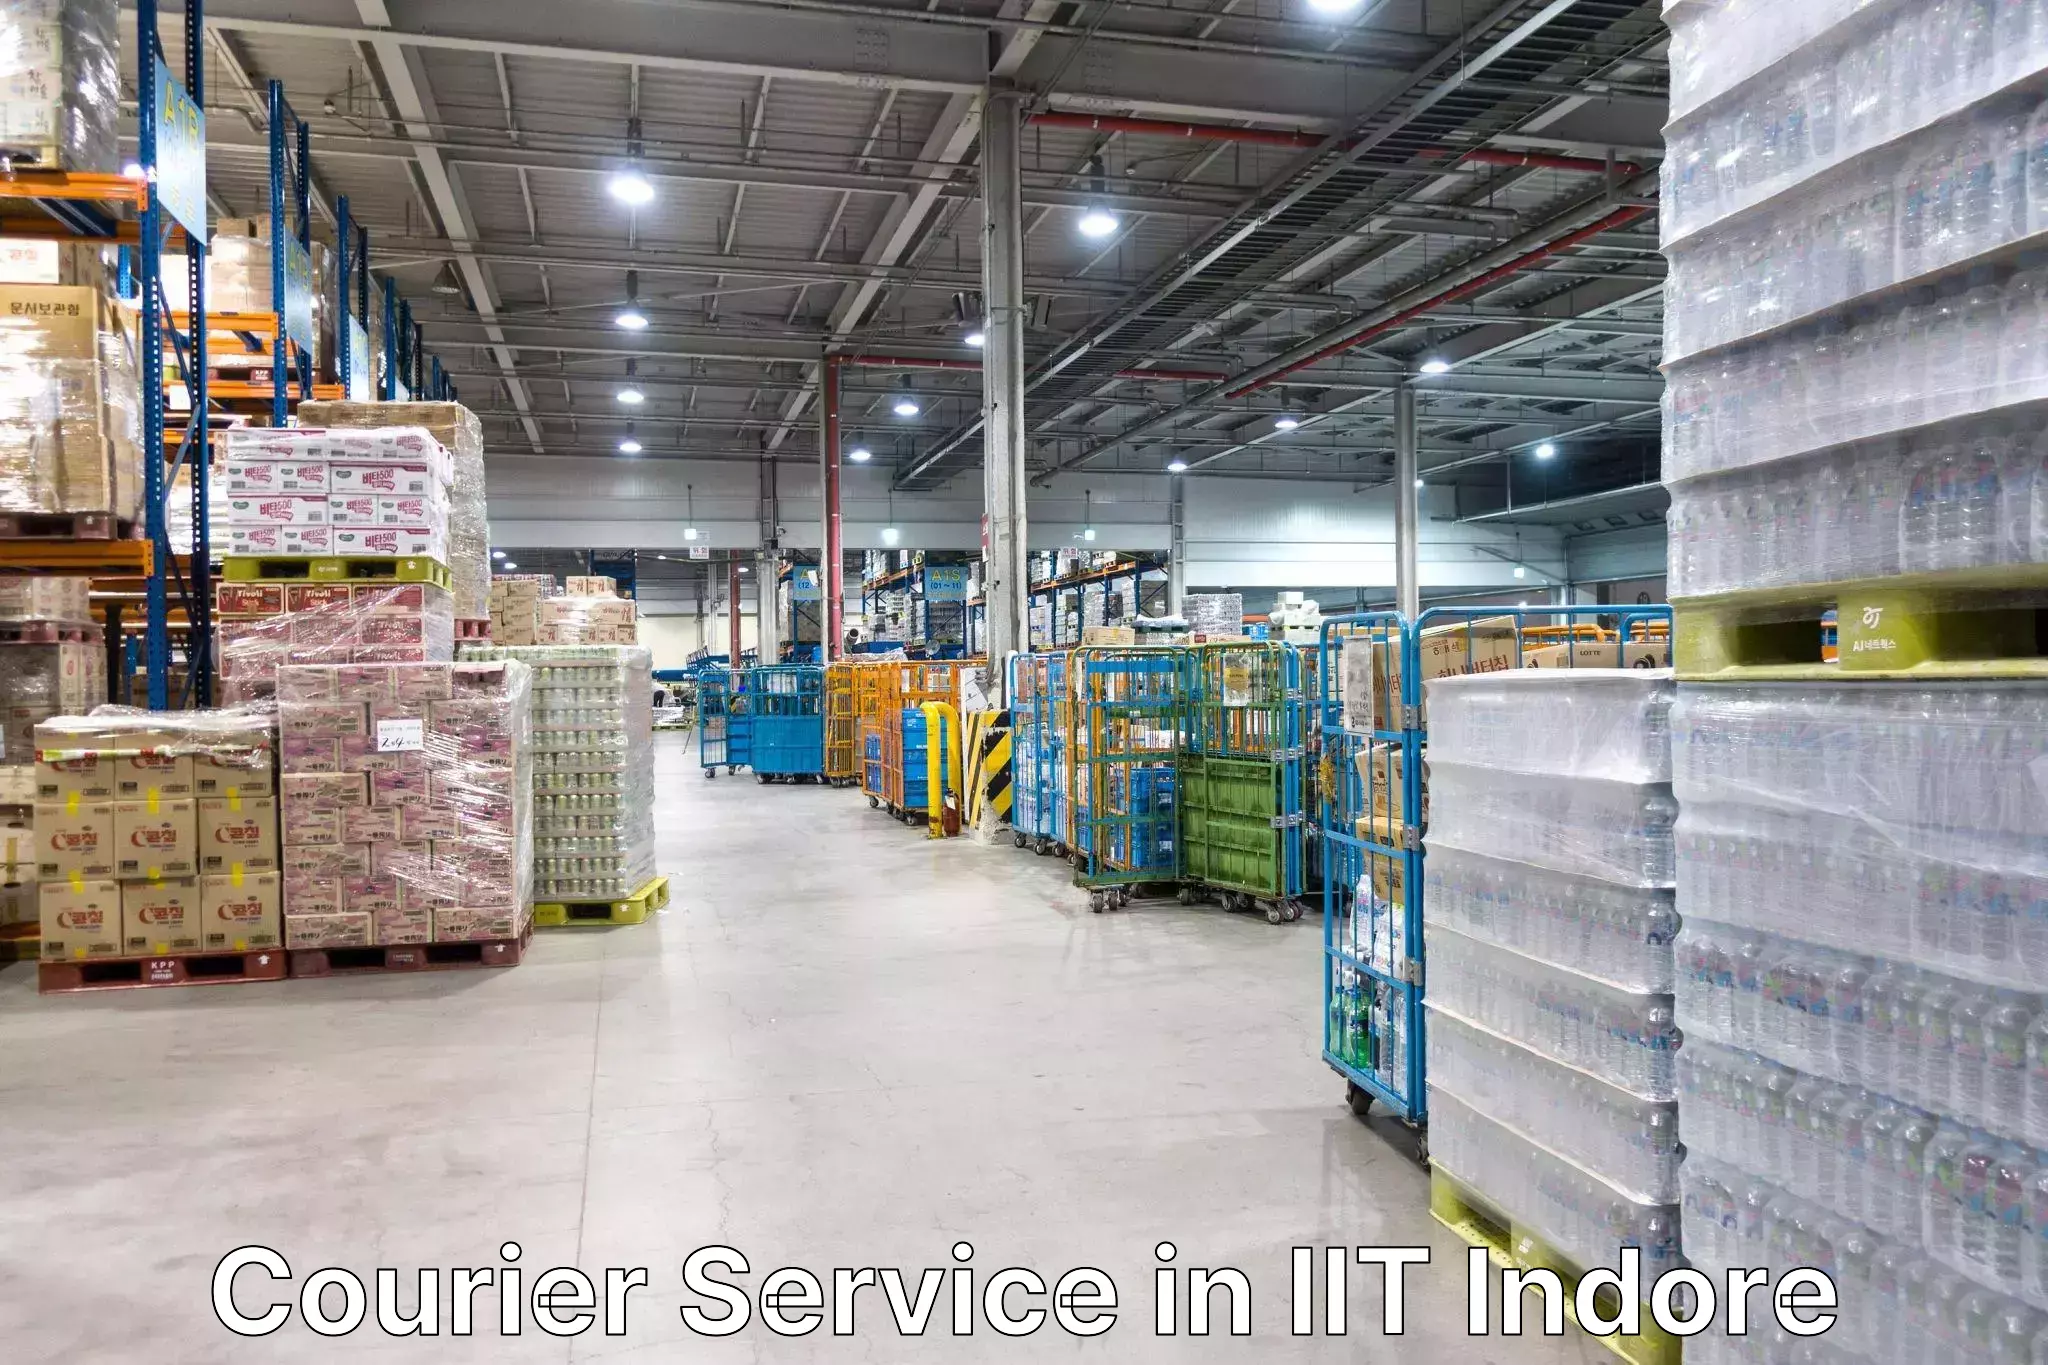 Nationwide shipping capabilities in IIT Indore